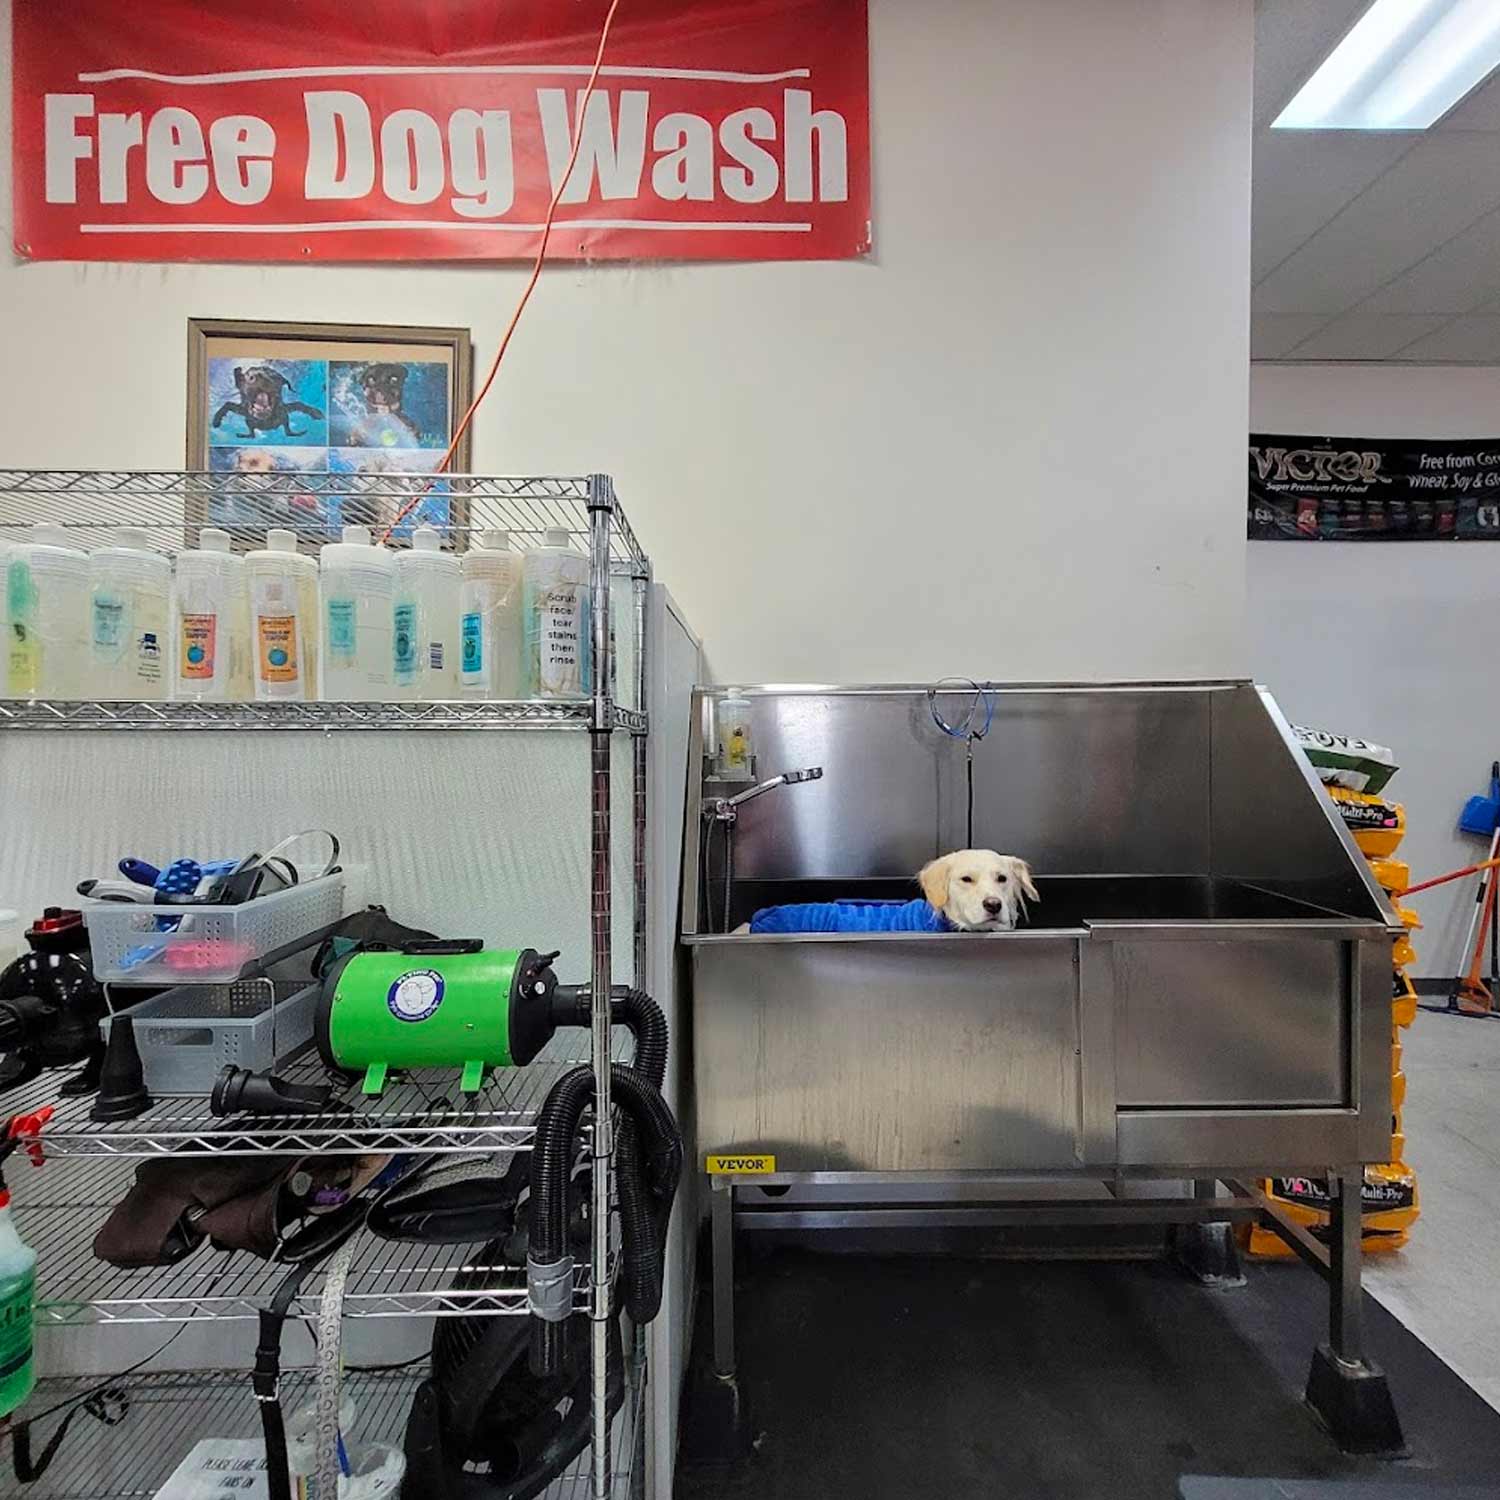 Rainbow dog supplies outlet free self wash